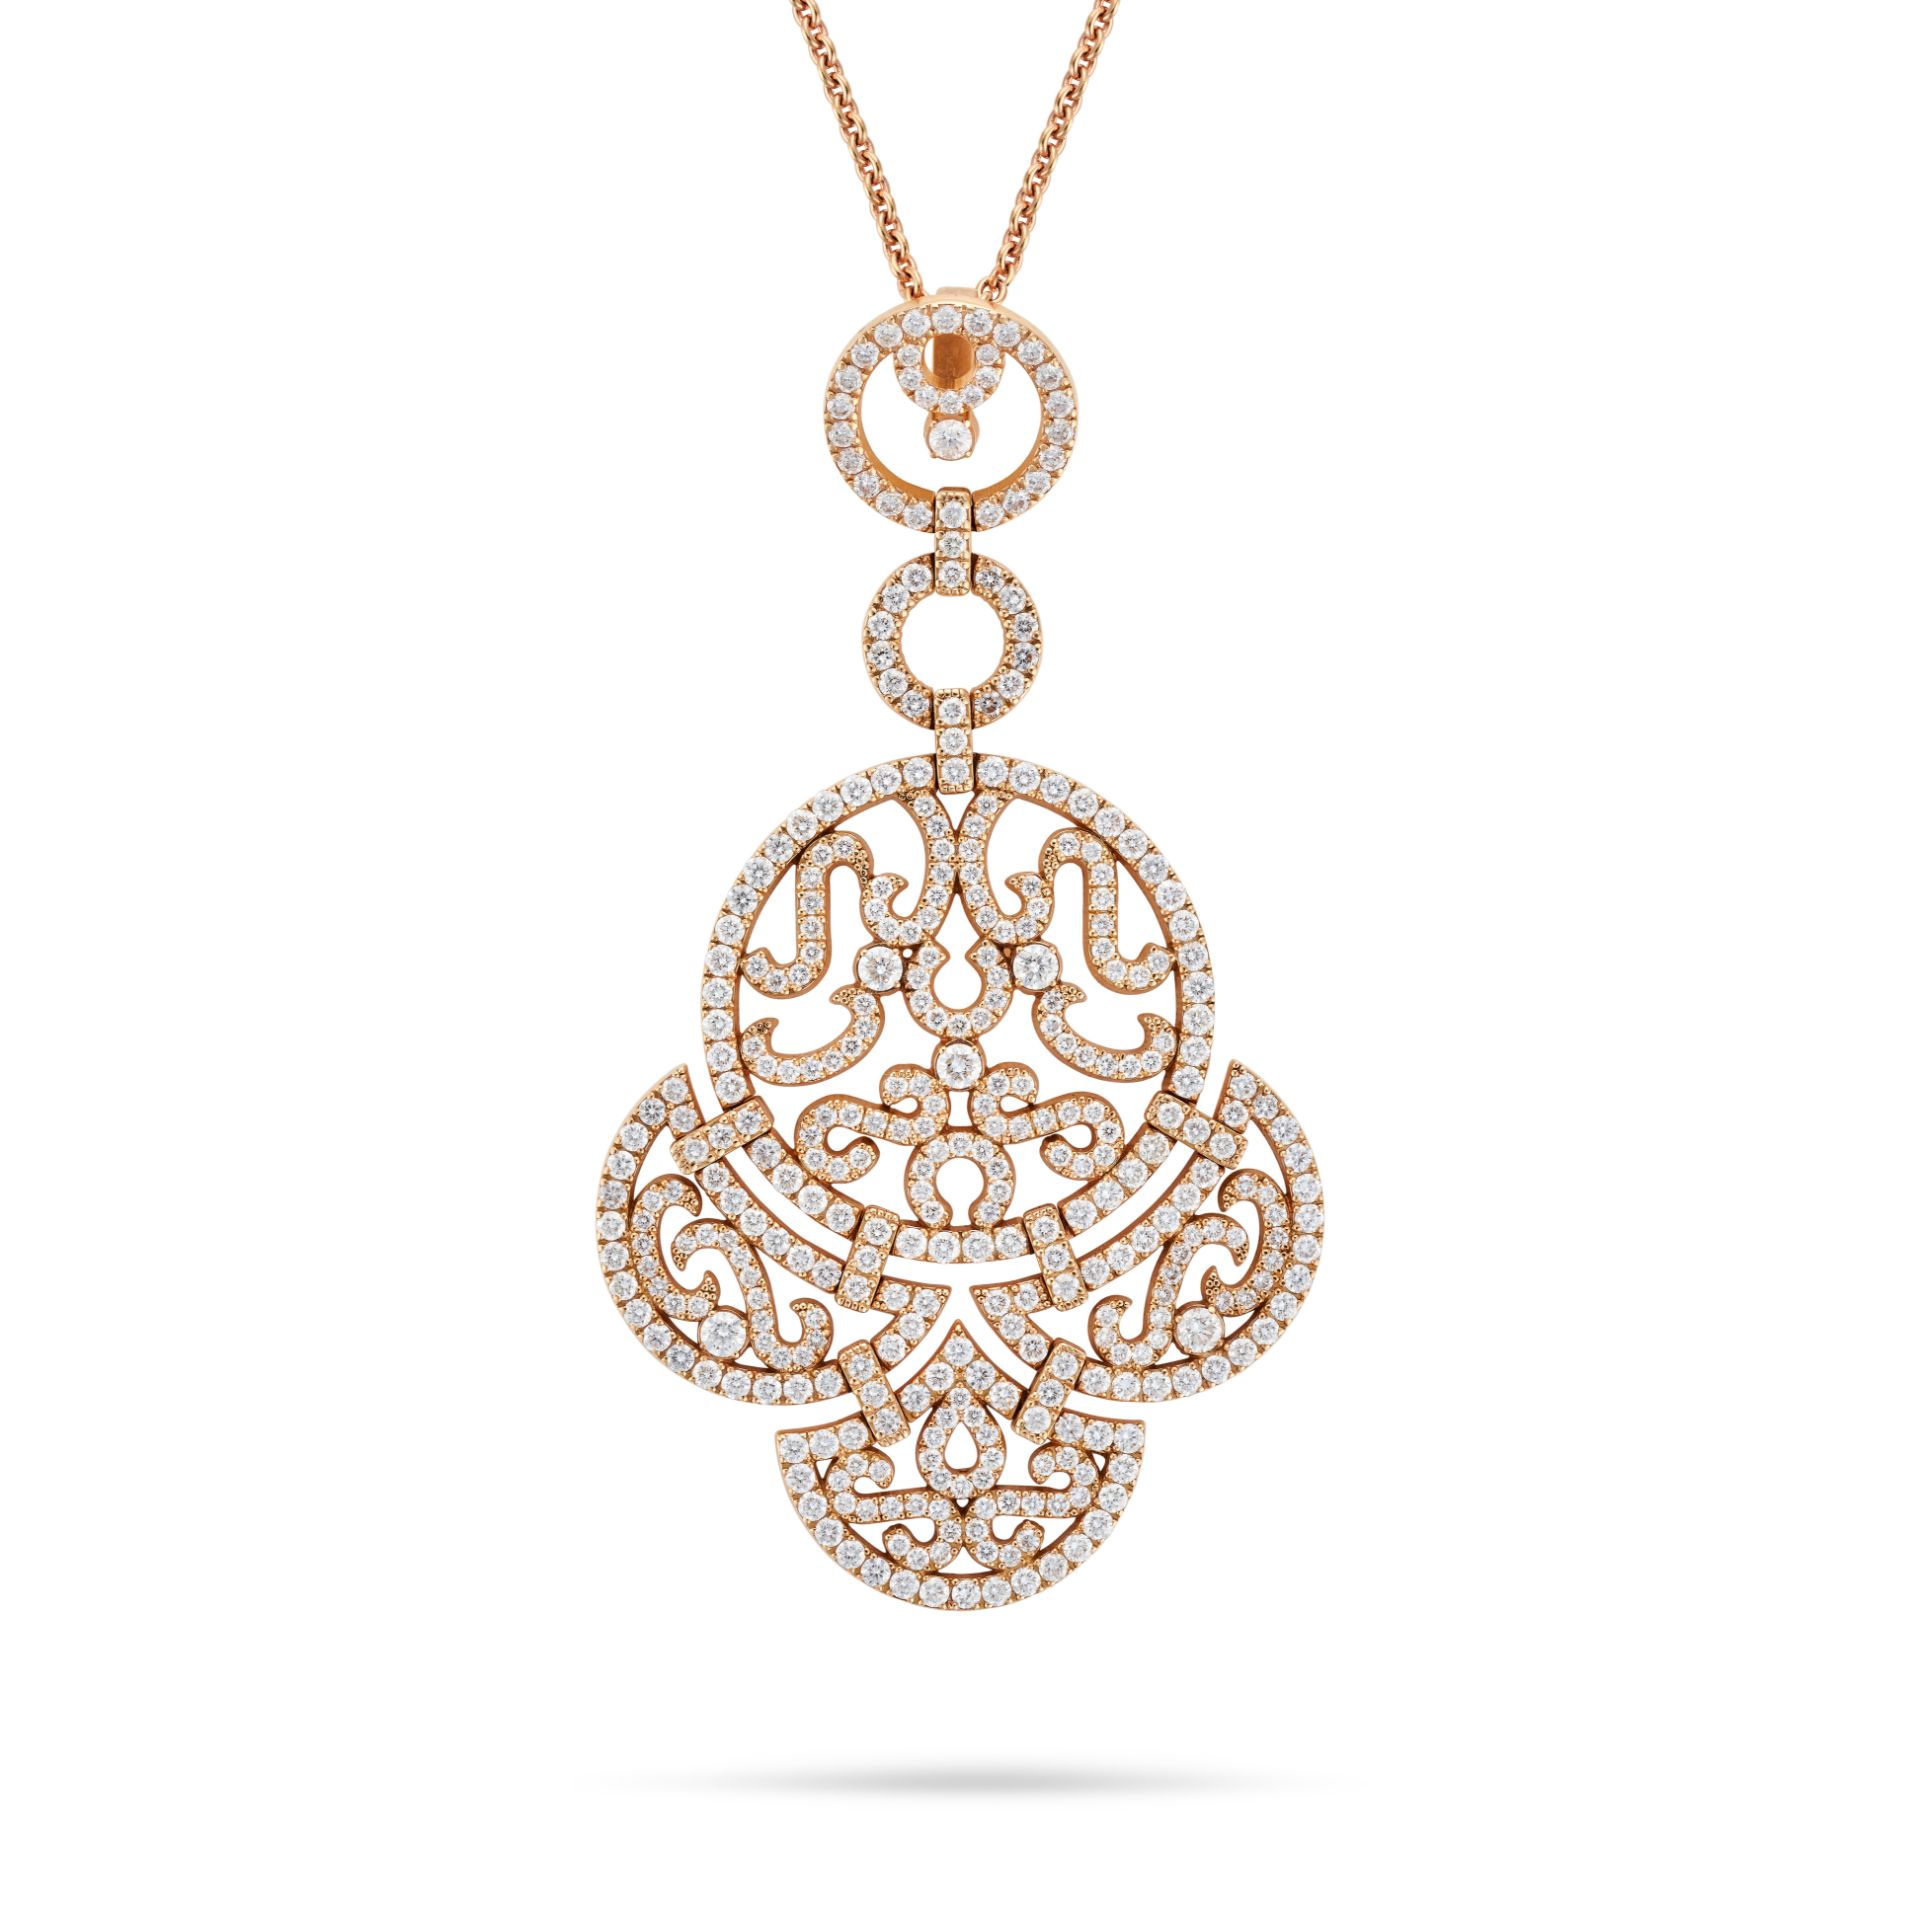 JACOB & CO., A DIAMOND PENDANT NECKLACE the openwork pendant set throughout with round brilliant ...